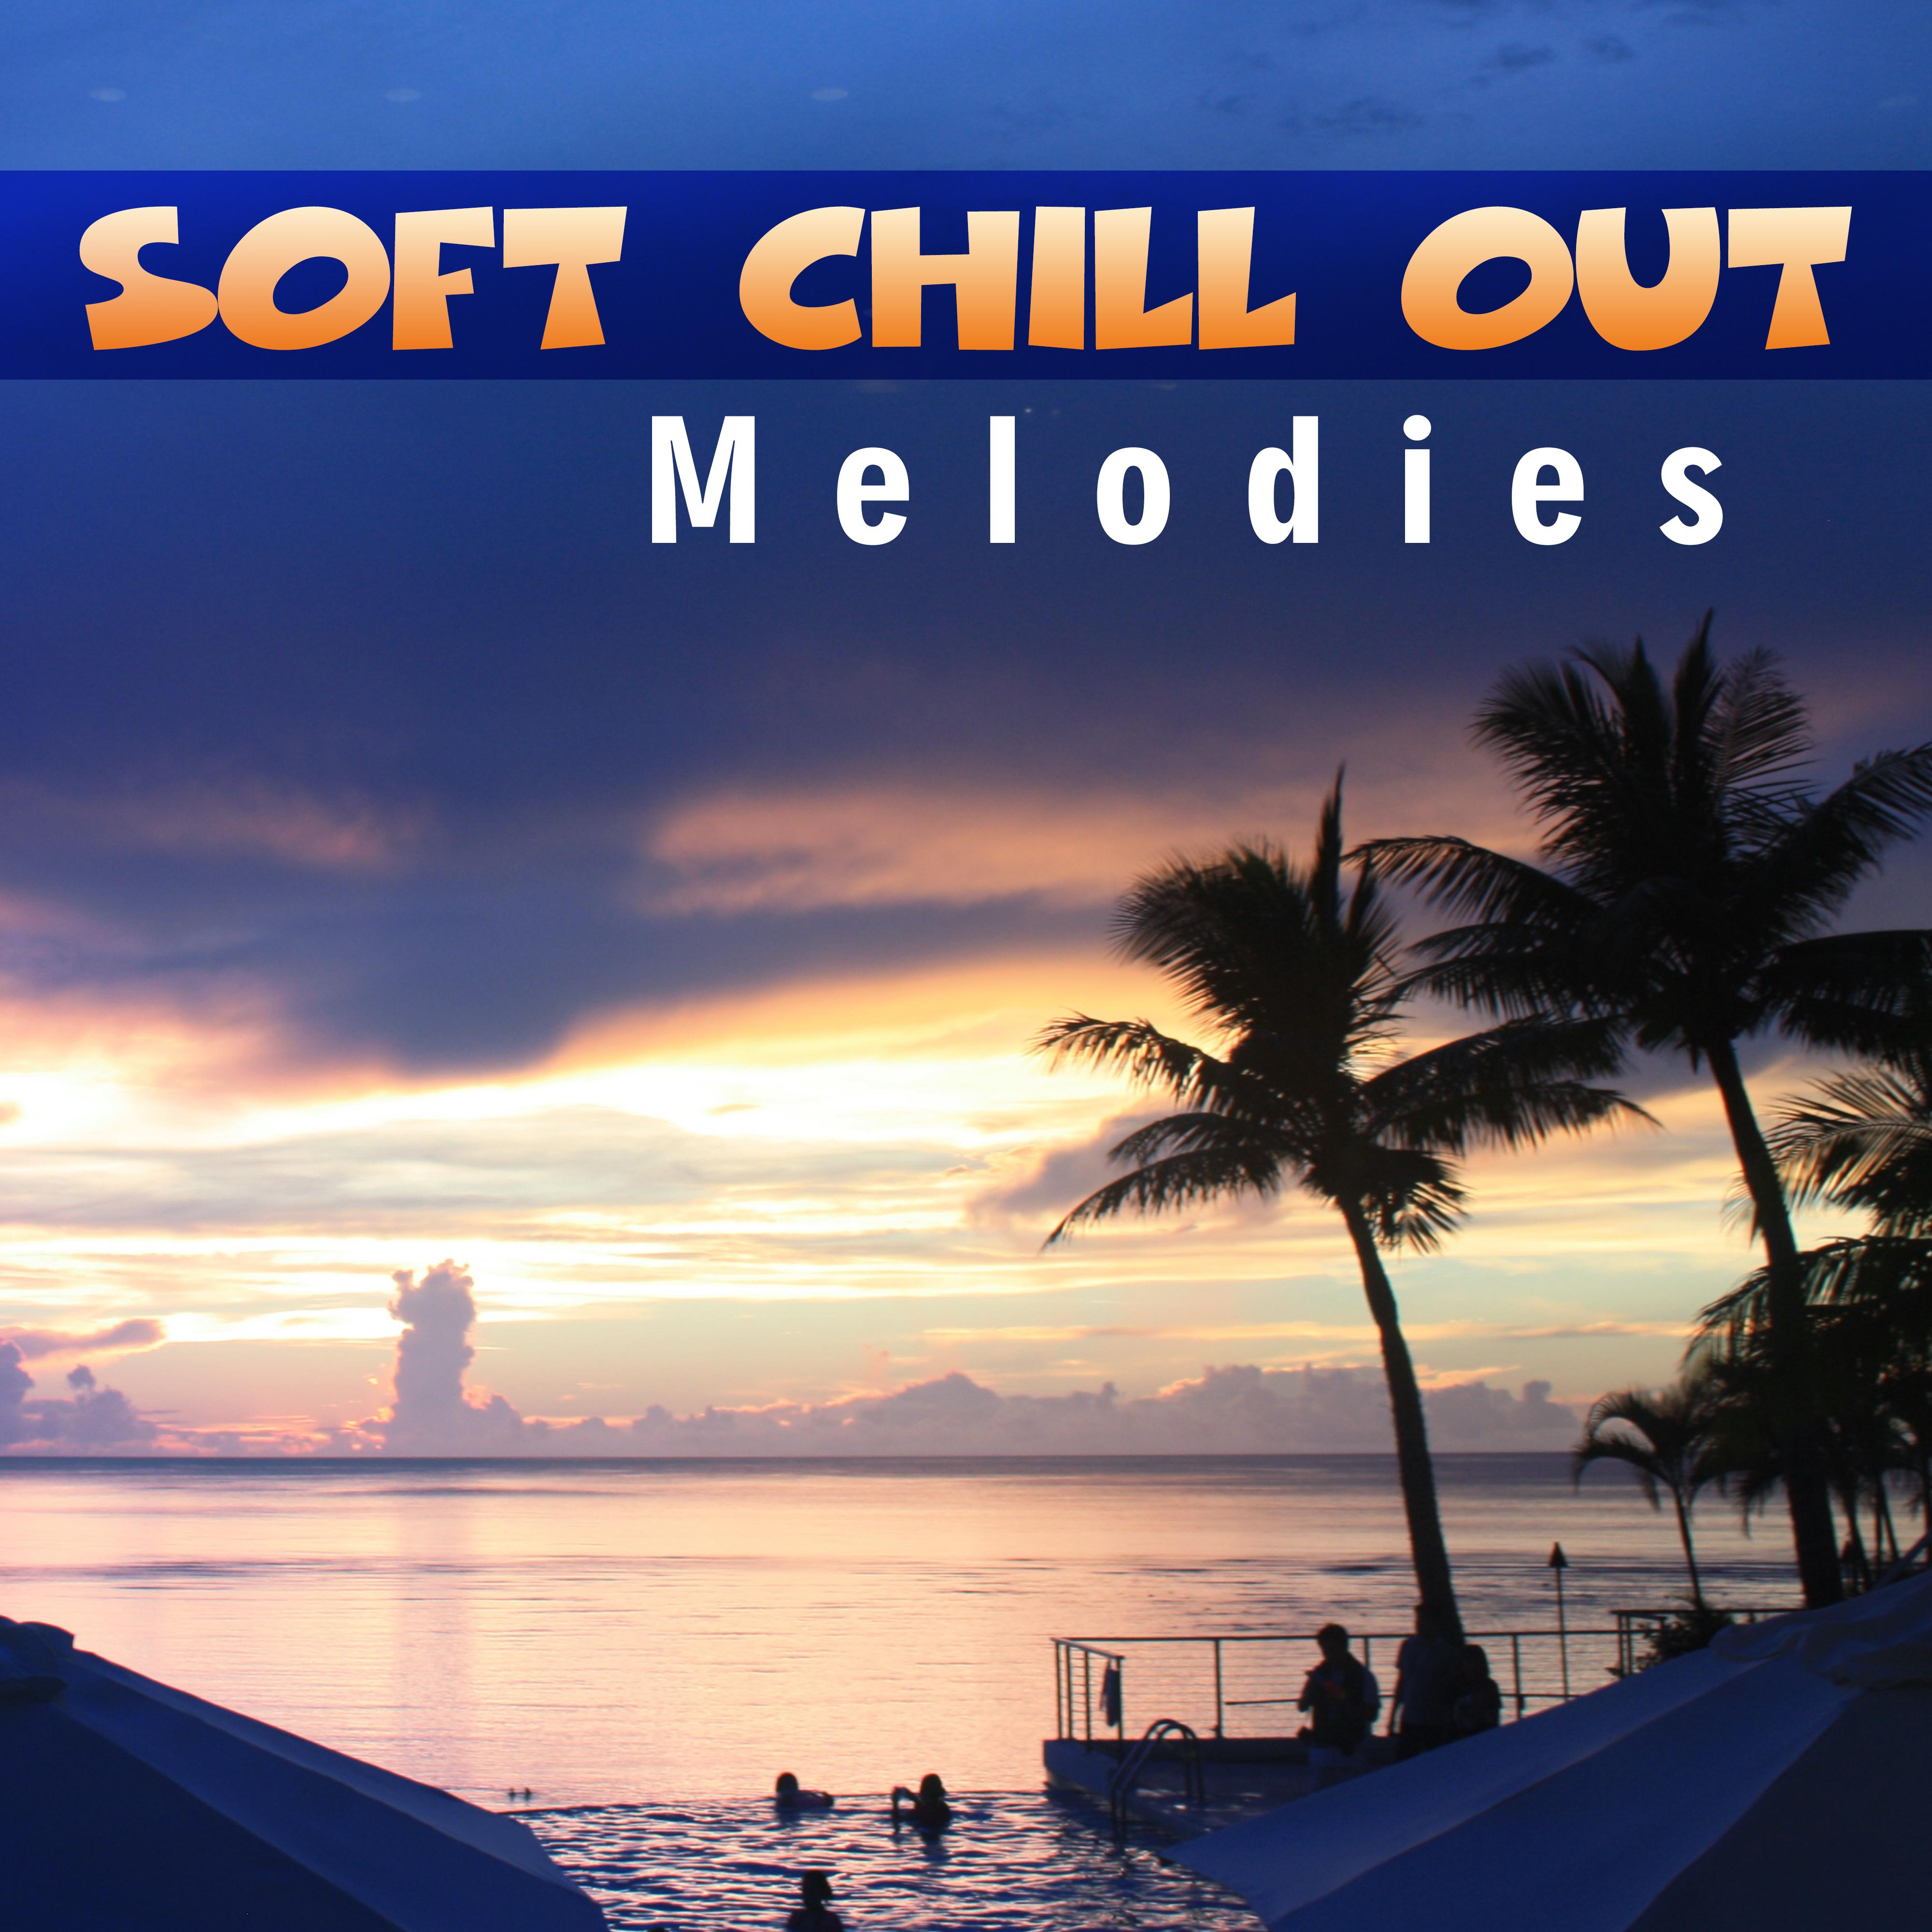 Soft Chill Out Melodies  Easy Listening, Stress Relief, Chill Out Sounds, Music to Relax